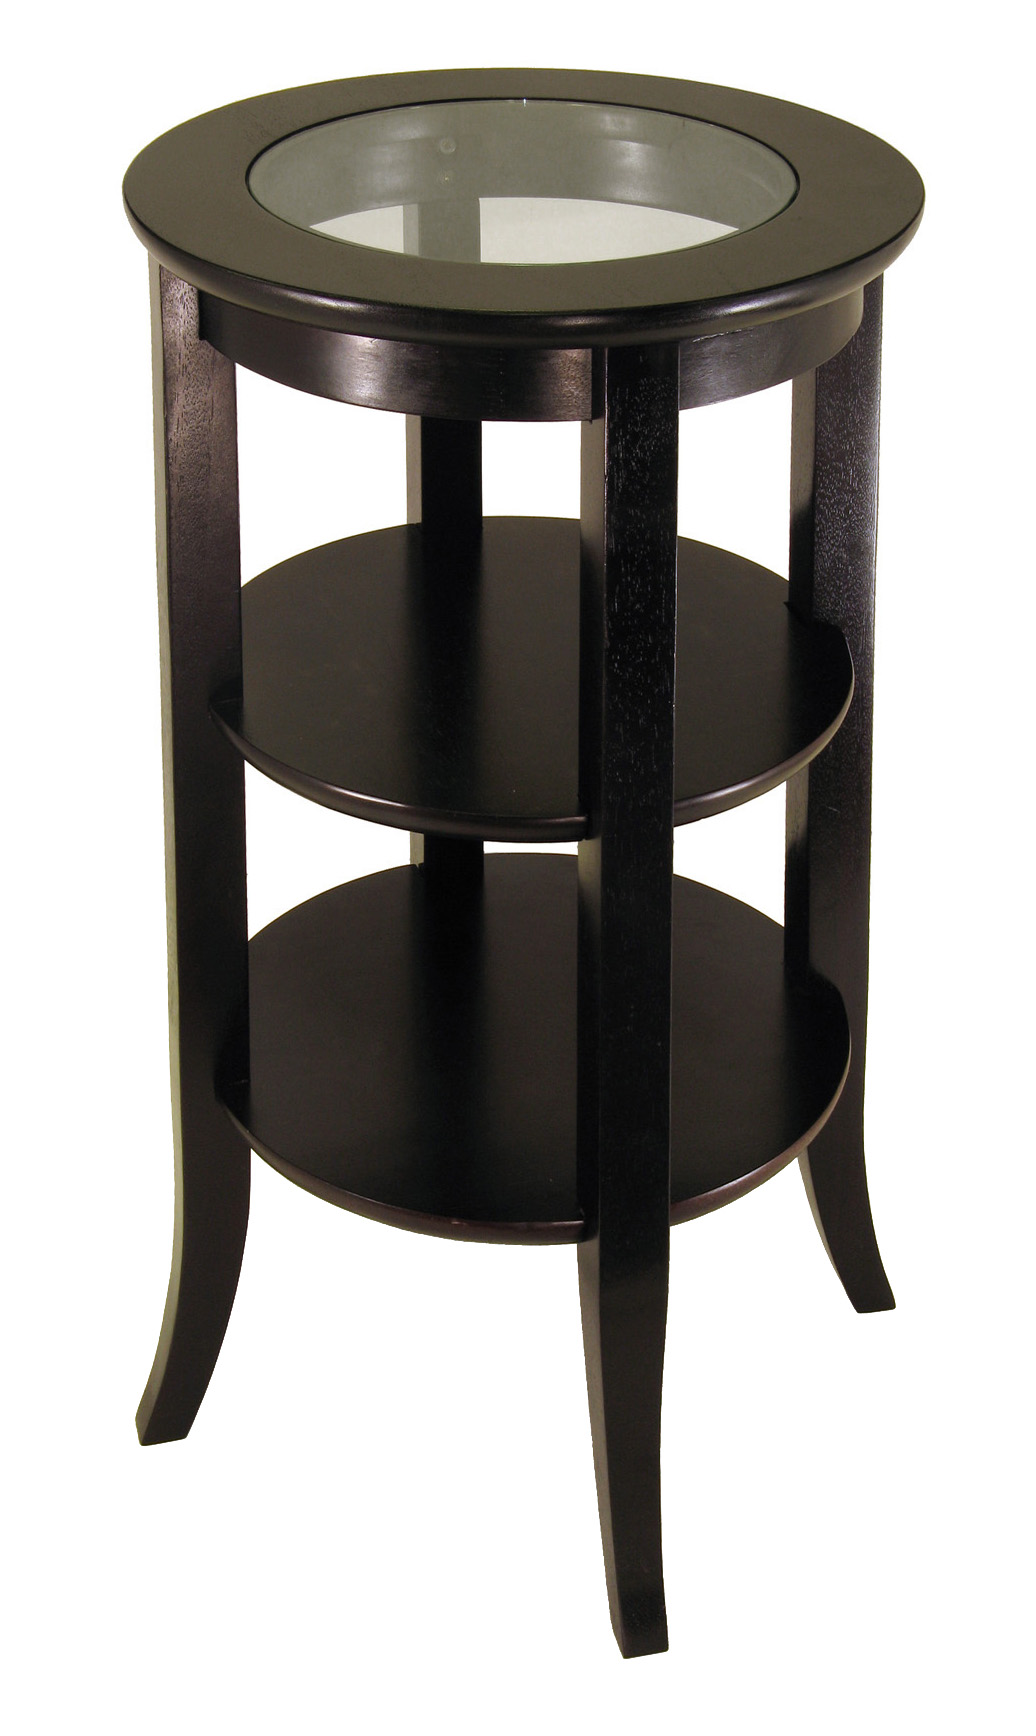 dolphins accent table winsome daniel with drawer black finish genoa inset glass two shelves beautiful centerpieces for dining room spindle legs decoration accessories square